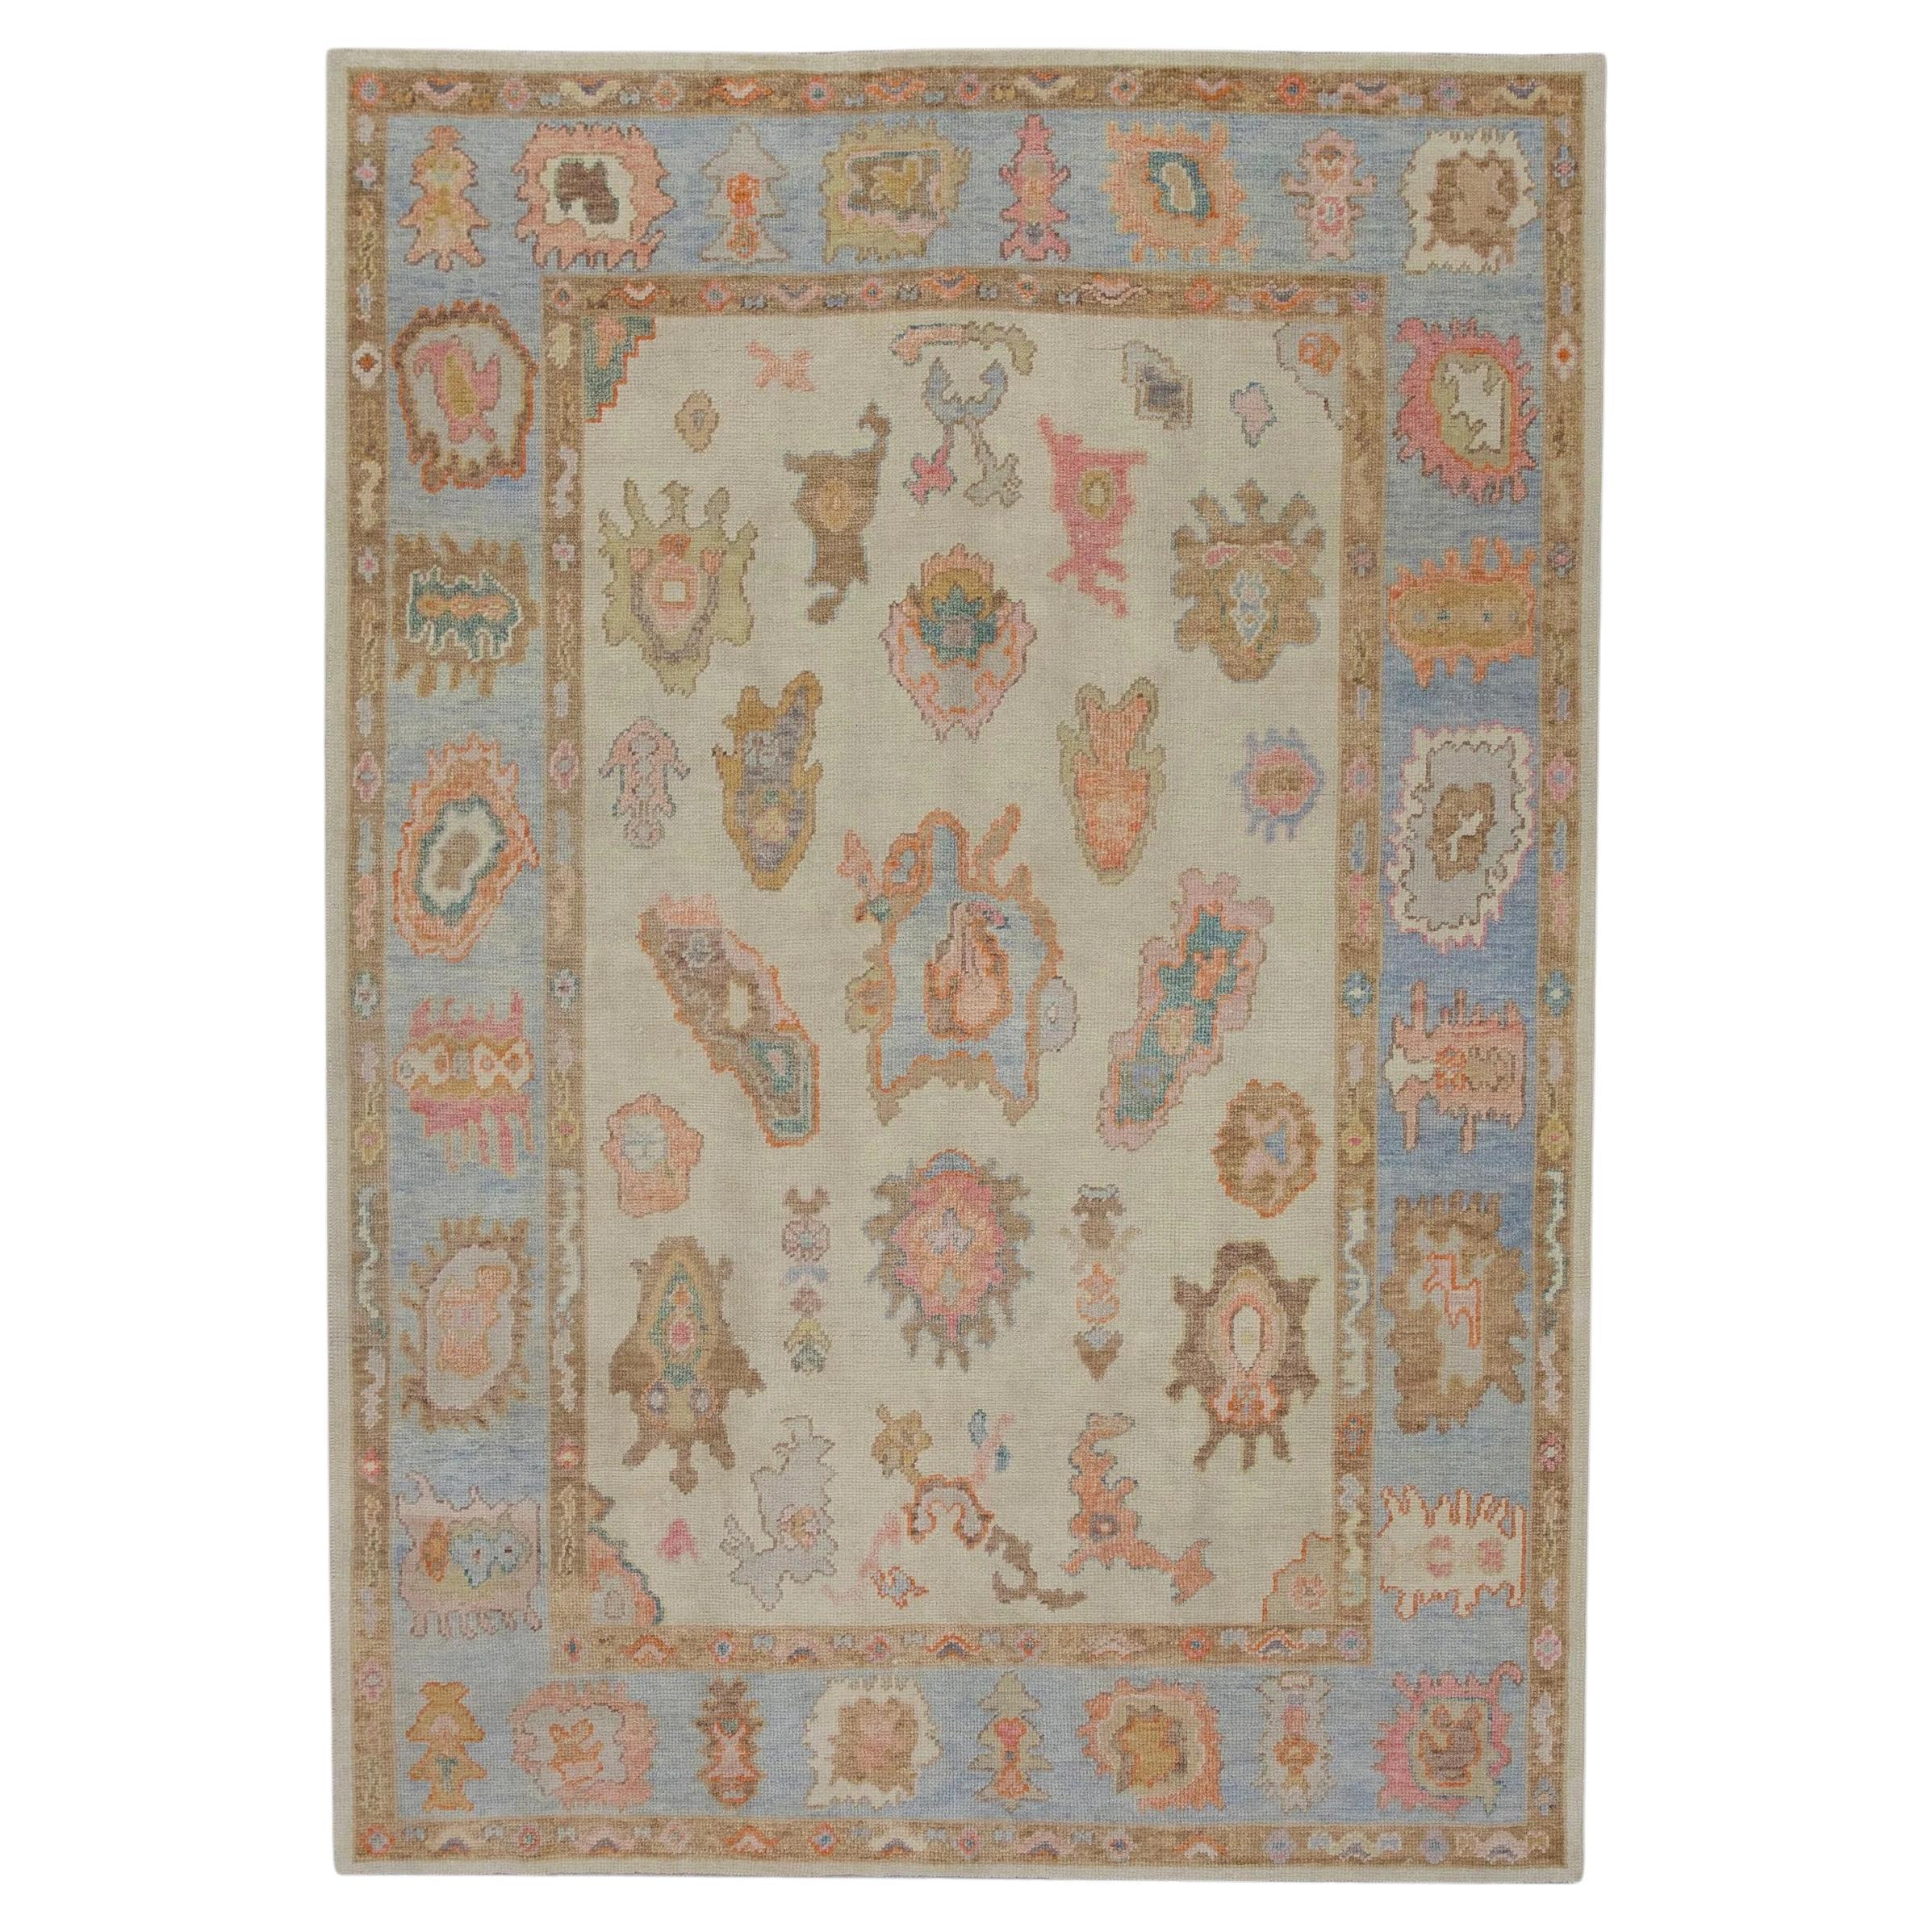 Blue and Pink Floral Design Handwoven Wool Turkish Oushak Rug 6'2" x 8'10" For Sale